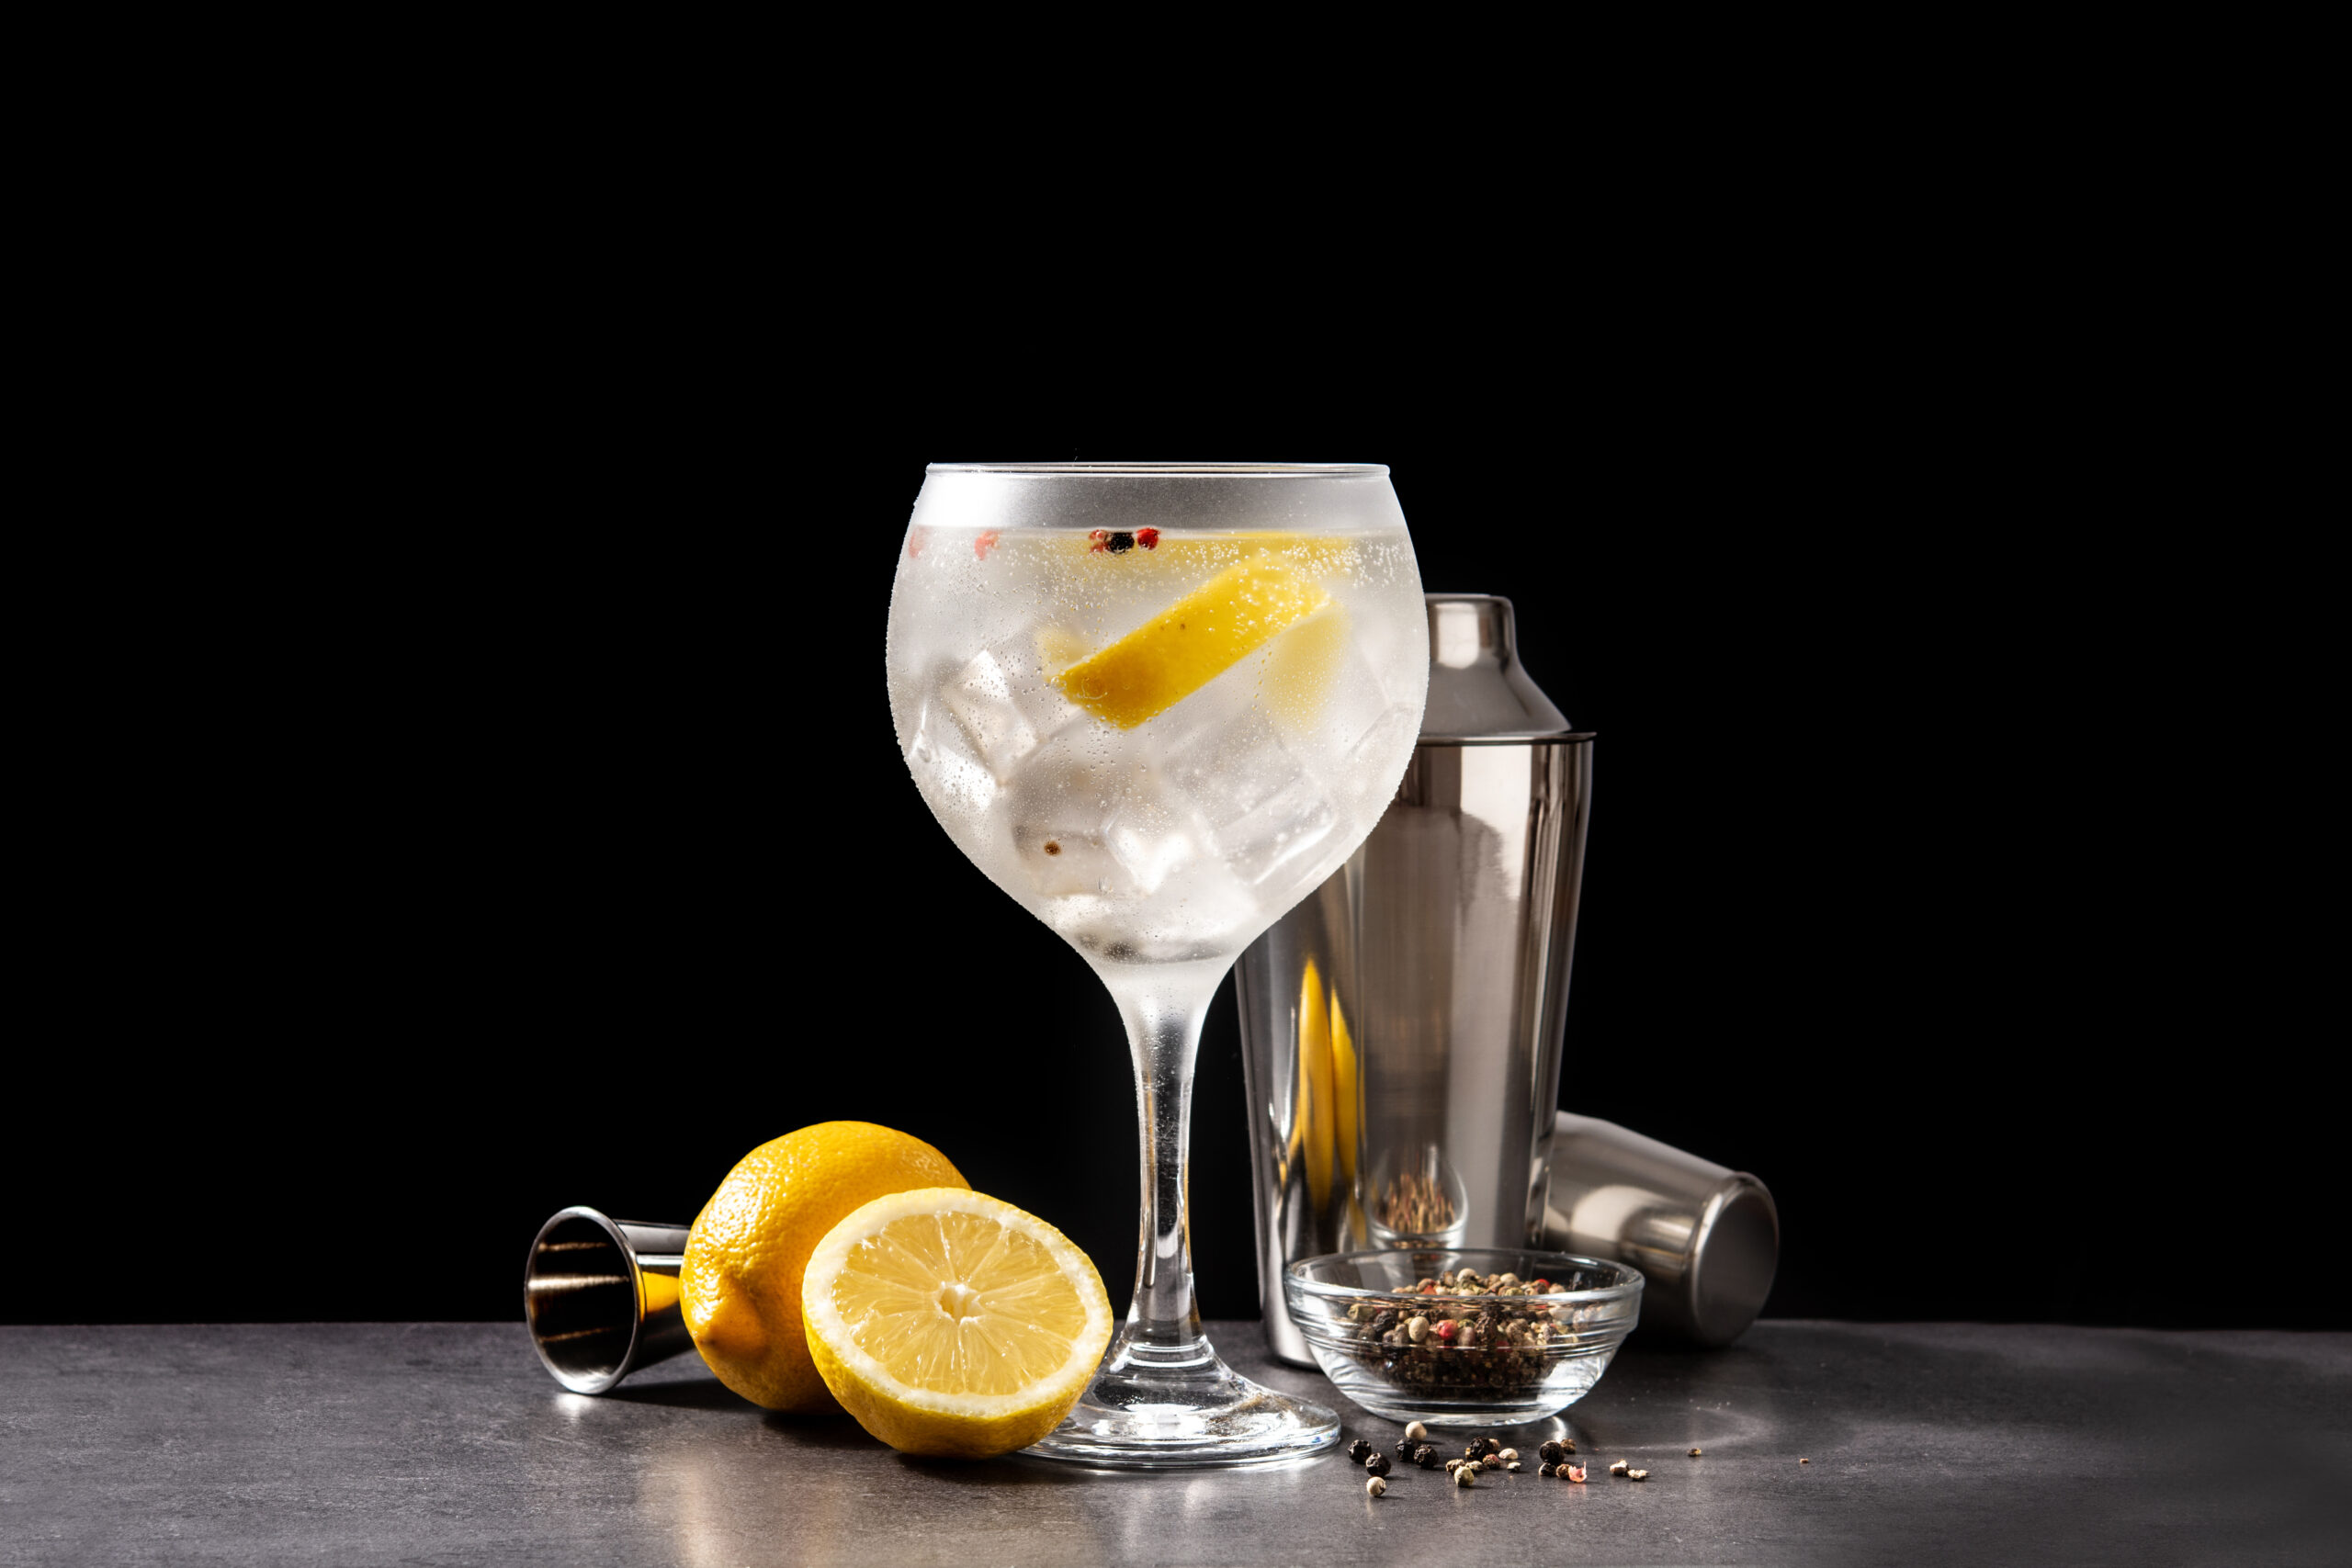 A glass filled with ice and lemon slices, with a cocktail mixer set just behind it.